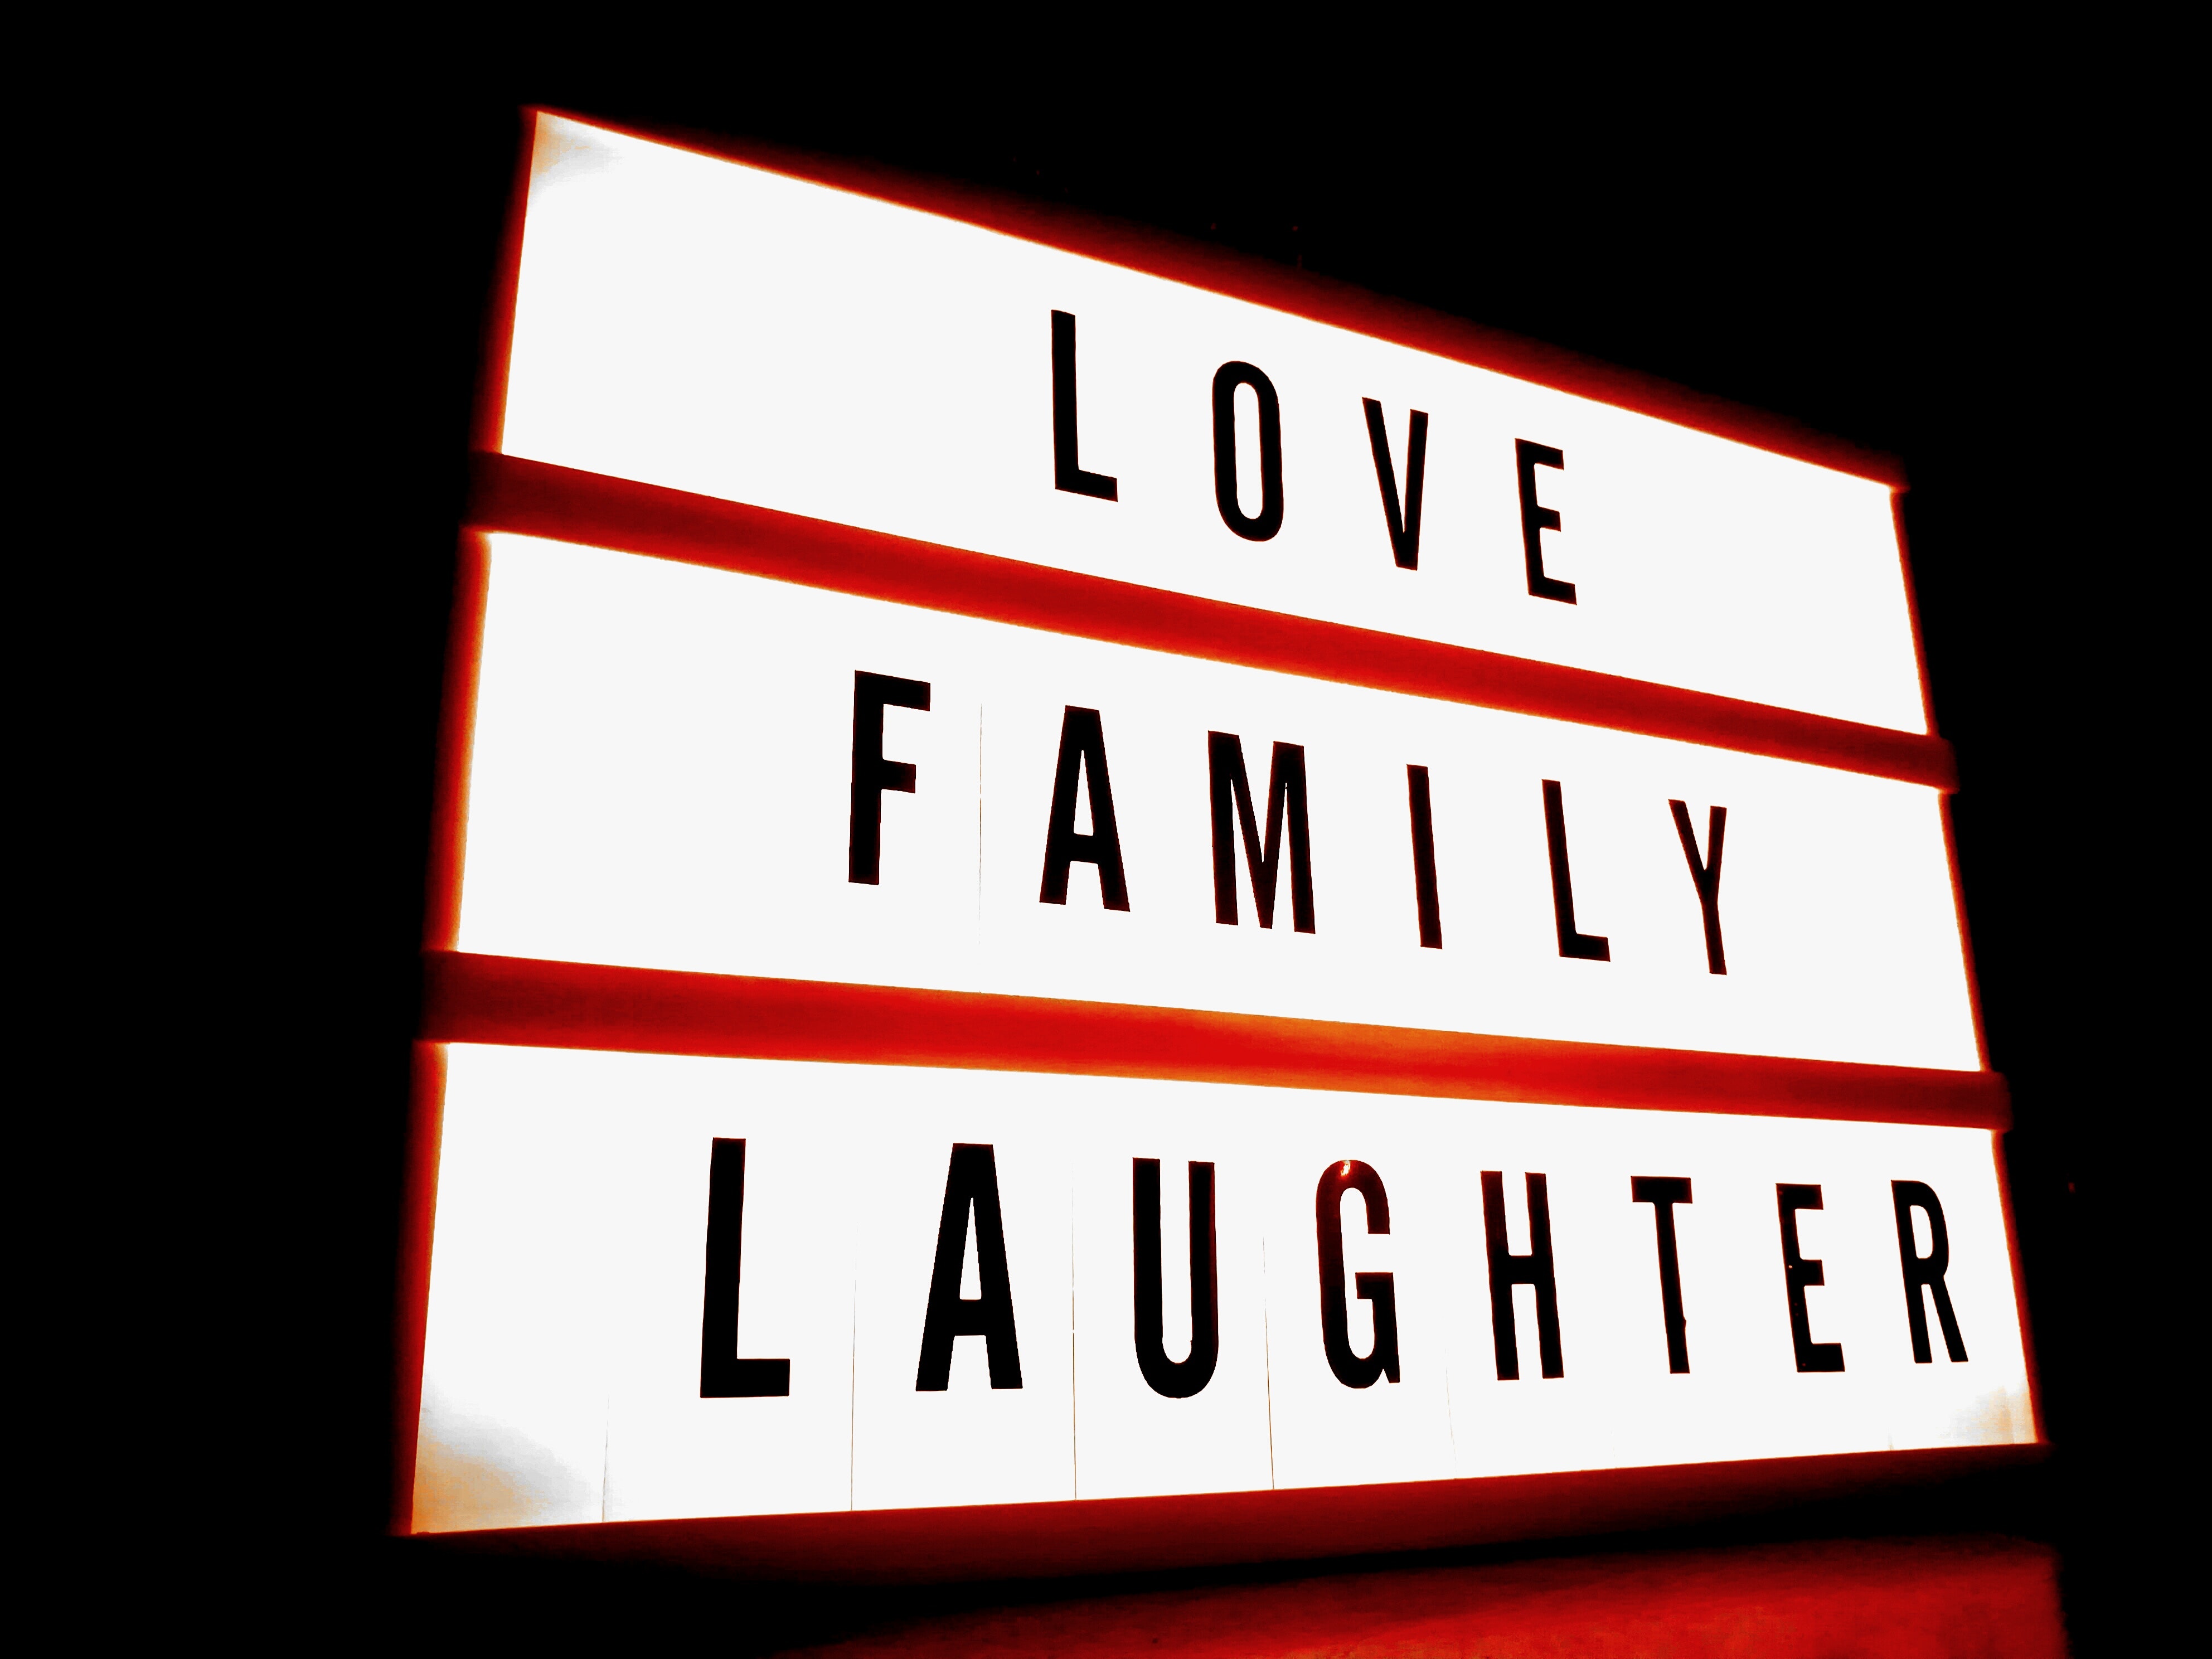 White and Red Led Signage With Love Family Laughter Text, Illustration, Text, Signage, Sign, HQ Photo